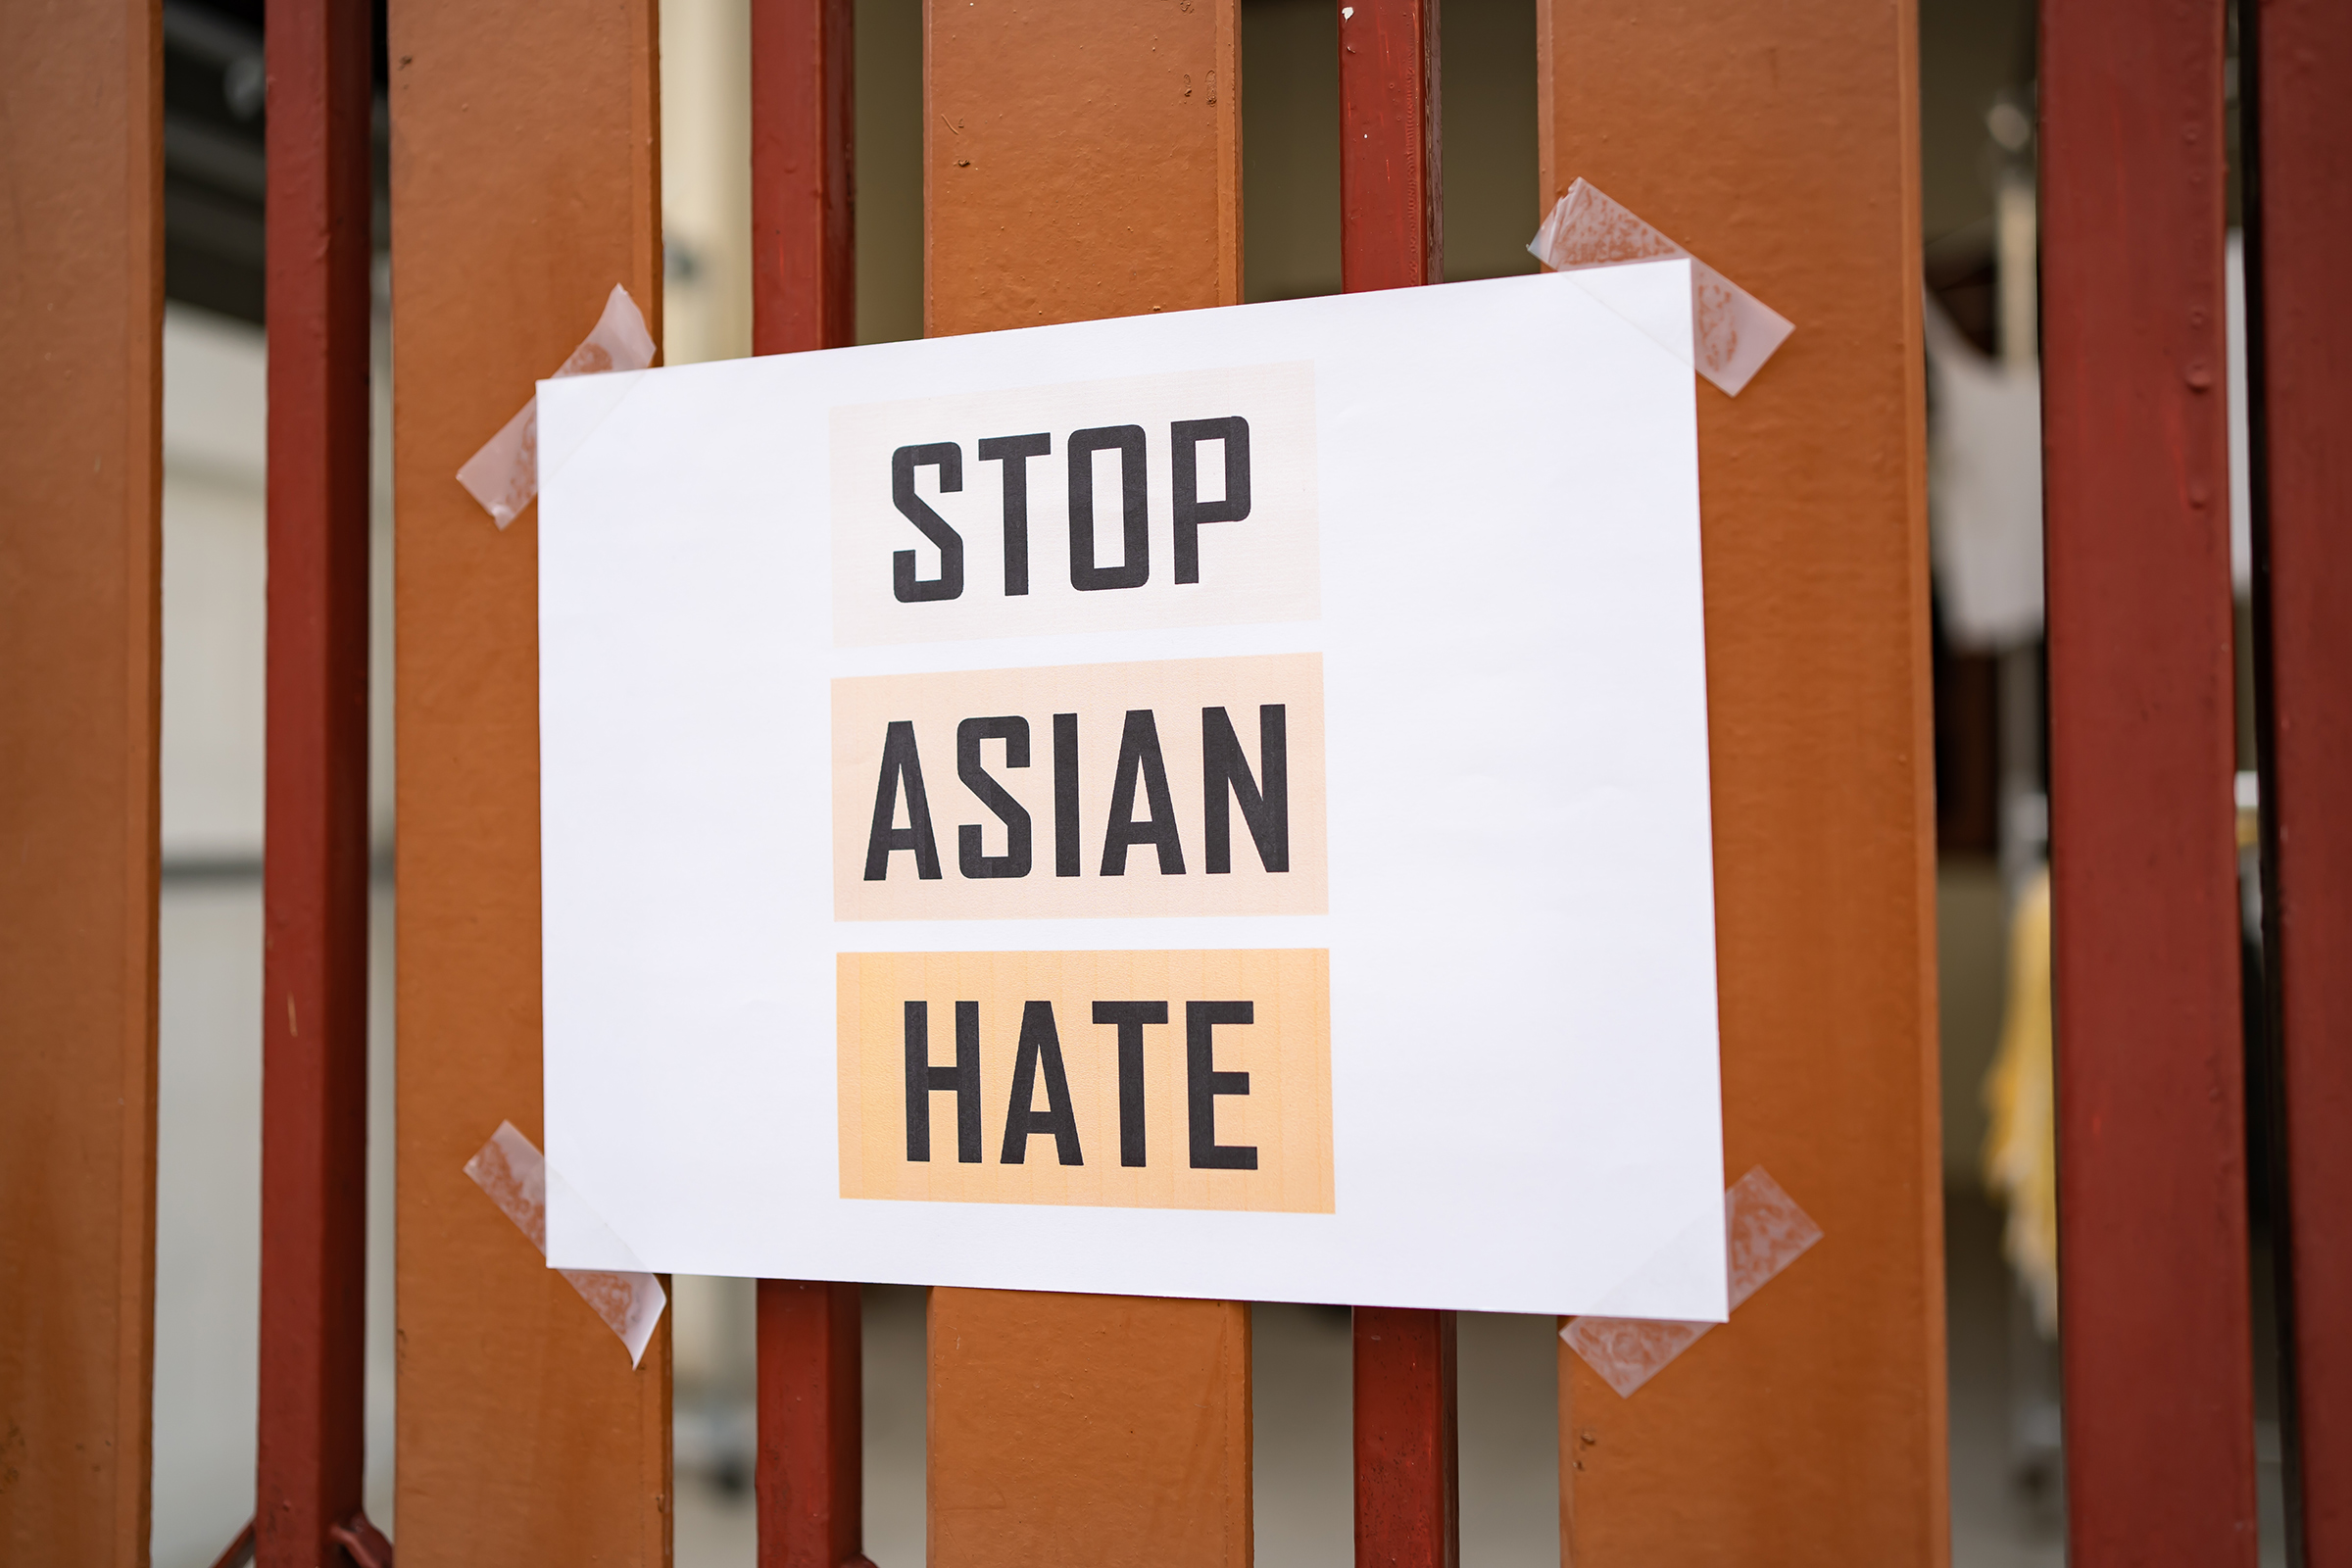 More than one year on from the start of the coronavirus pandemic, East and South East Asian communities in countries around the world have reported spikes in hate crimes (Getty Images)